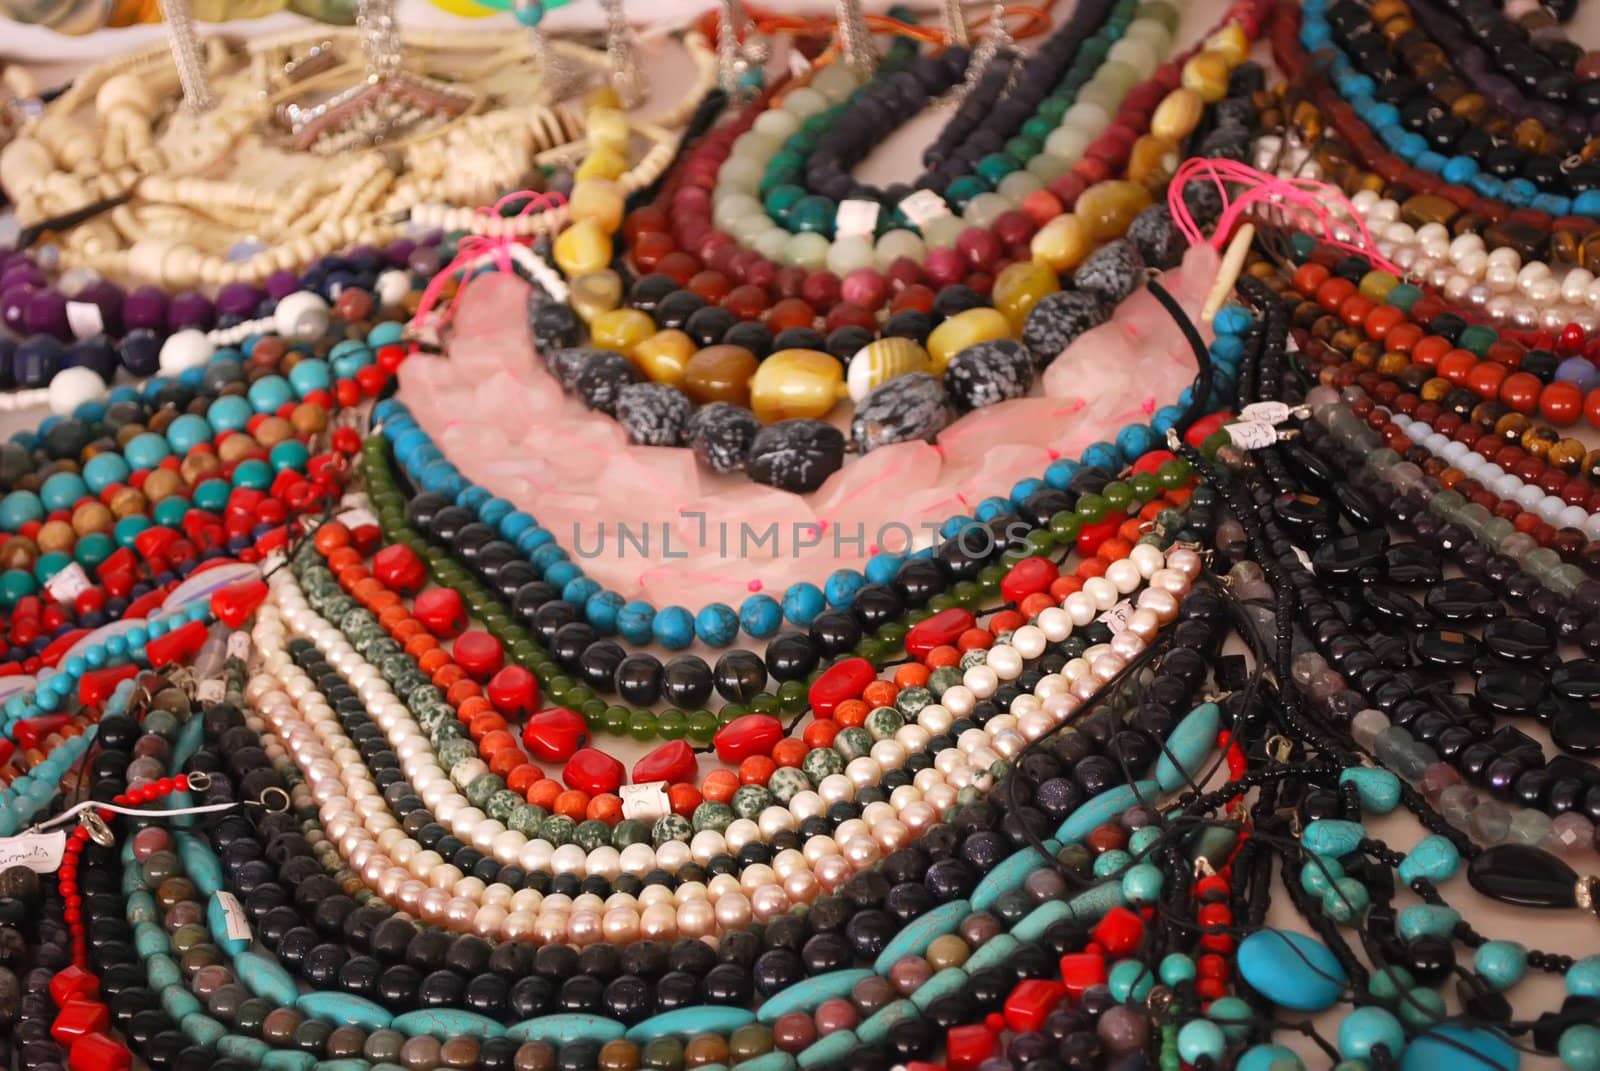 Stand of Multicolored Beads to Buy at the Arabic Market